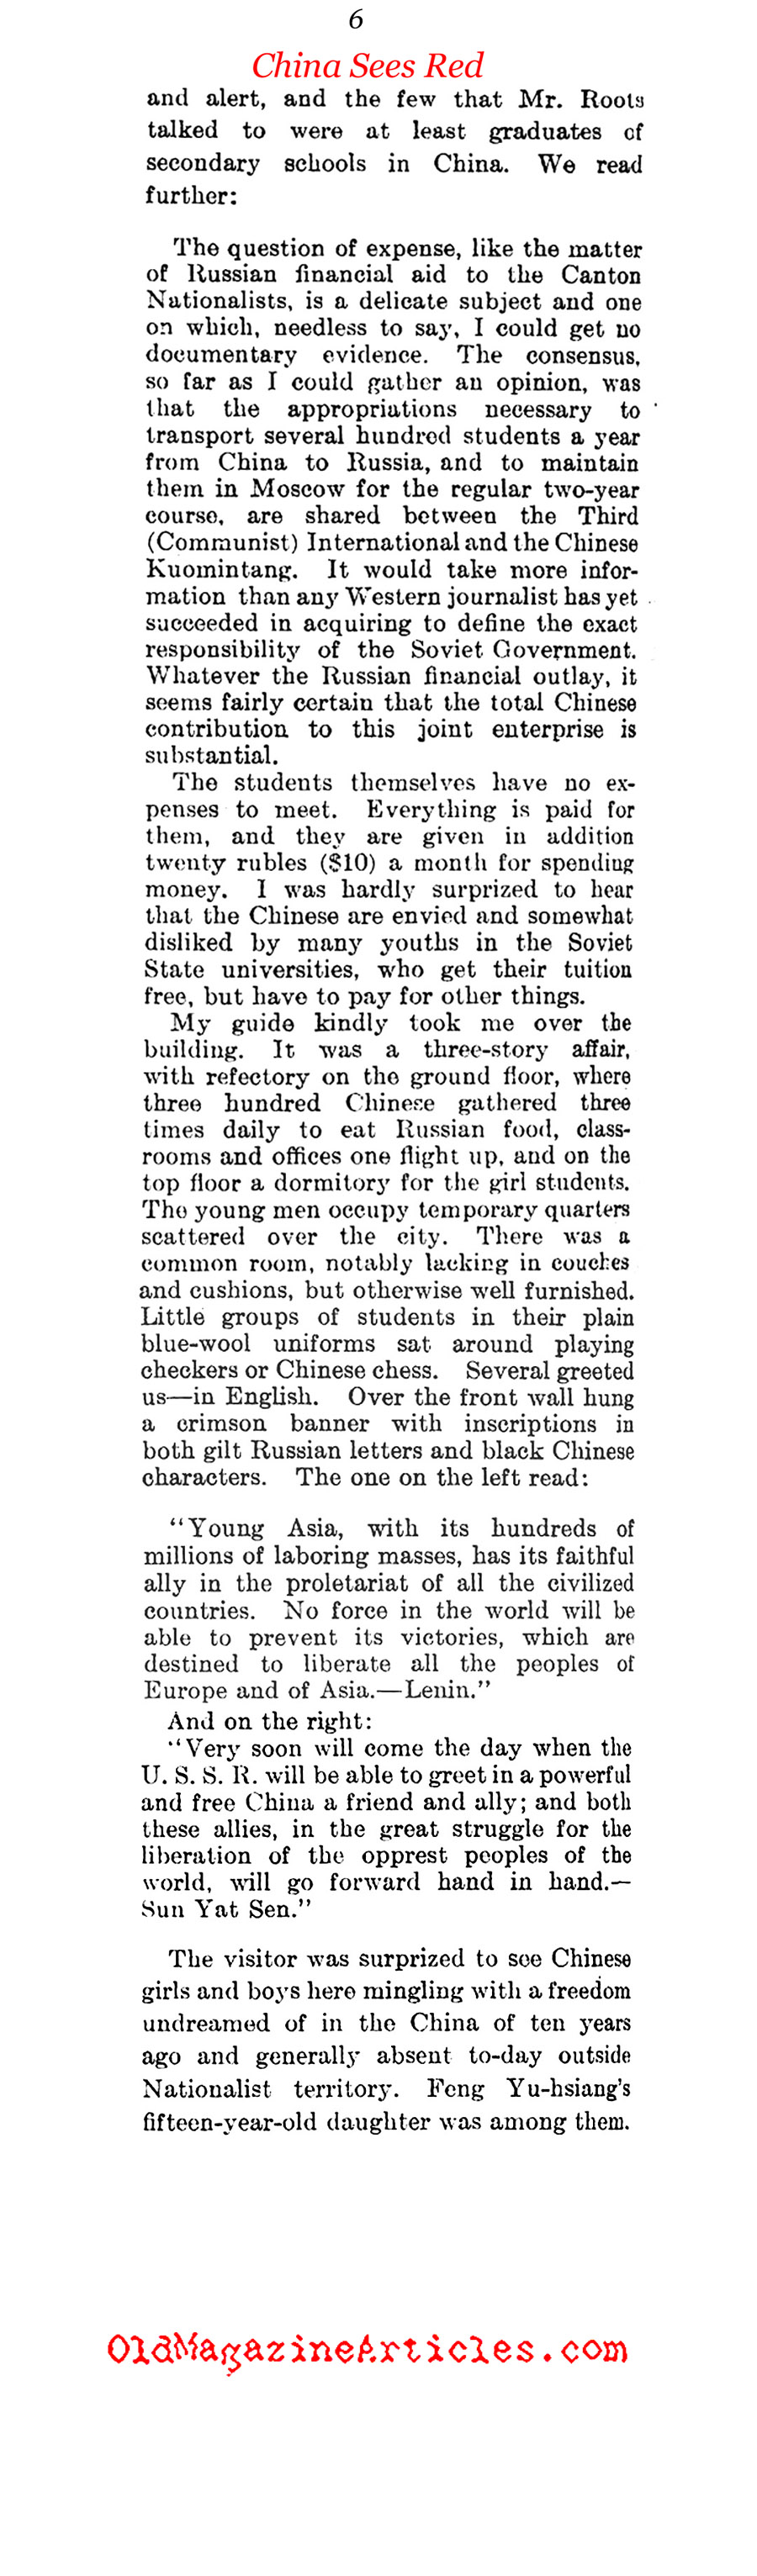 ''Where Moscow Is Teaching China to see Red'' (Literary Digest, 1927)